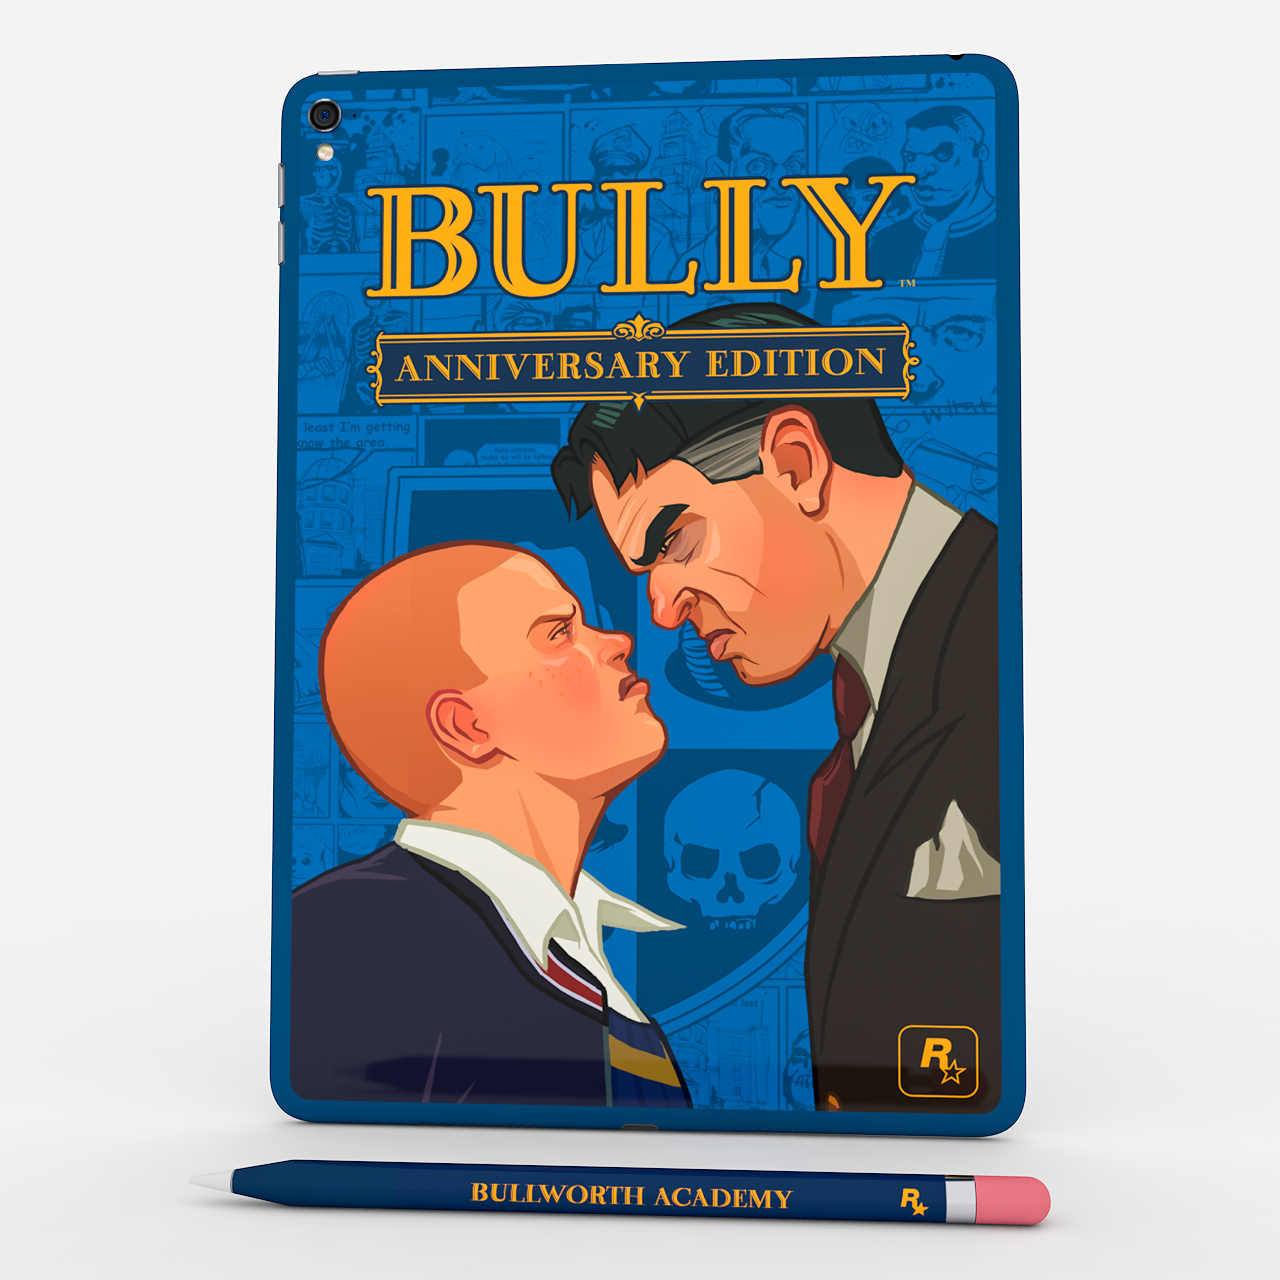 How to Download Bully Anniversary Edition in Android